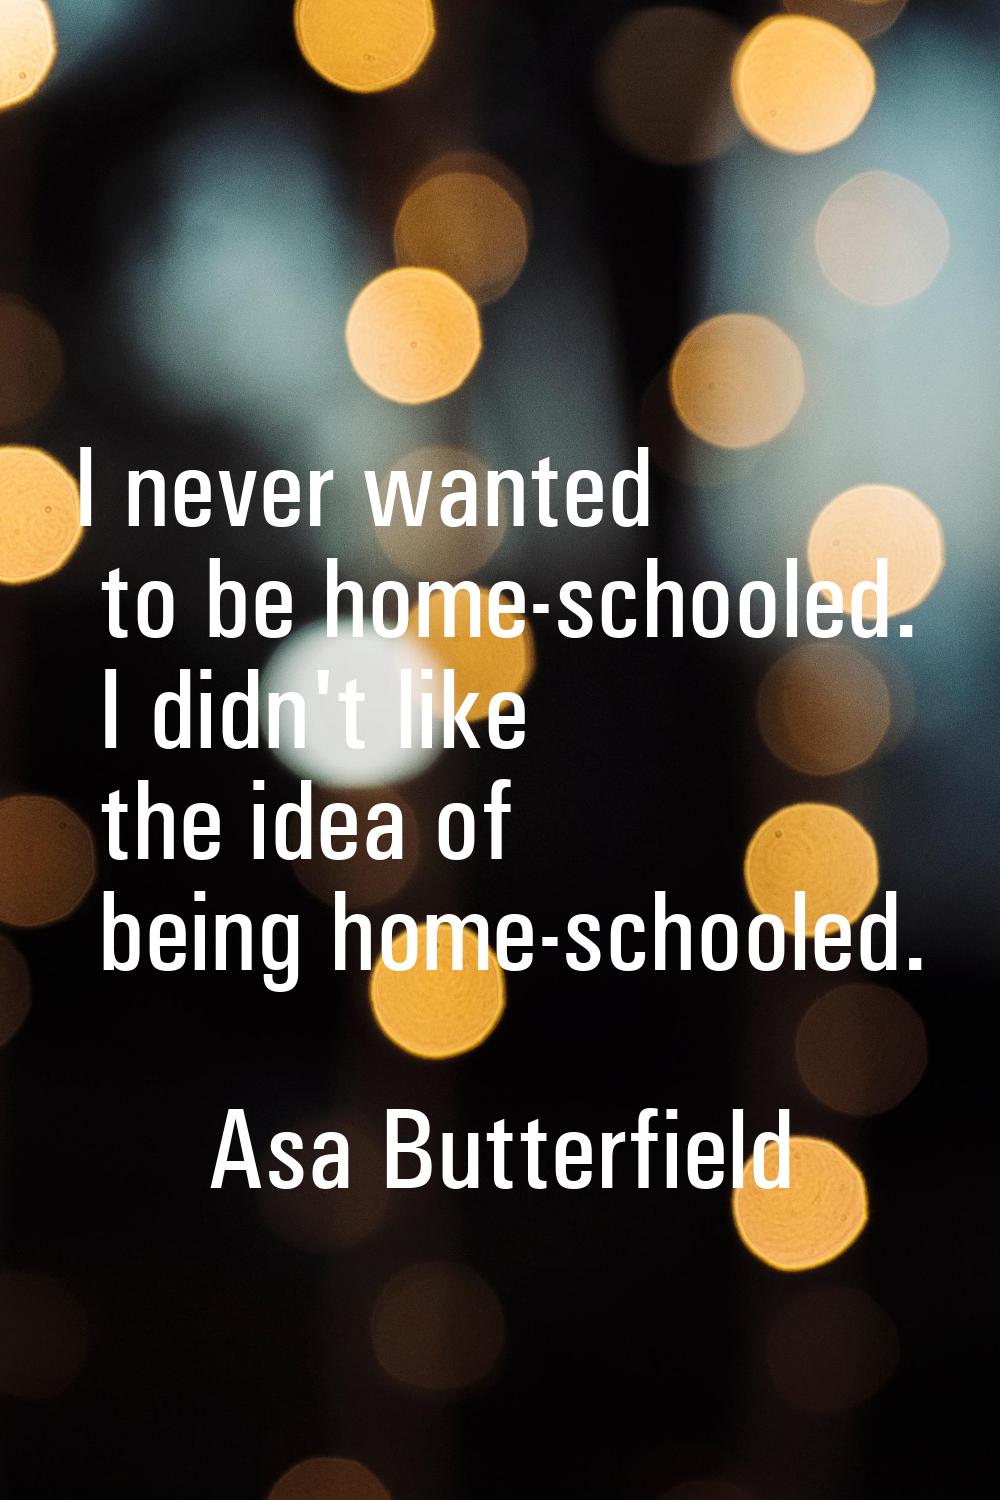 I never wanted to be home-schooled. I didn't like the idea of being home-schooled.